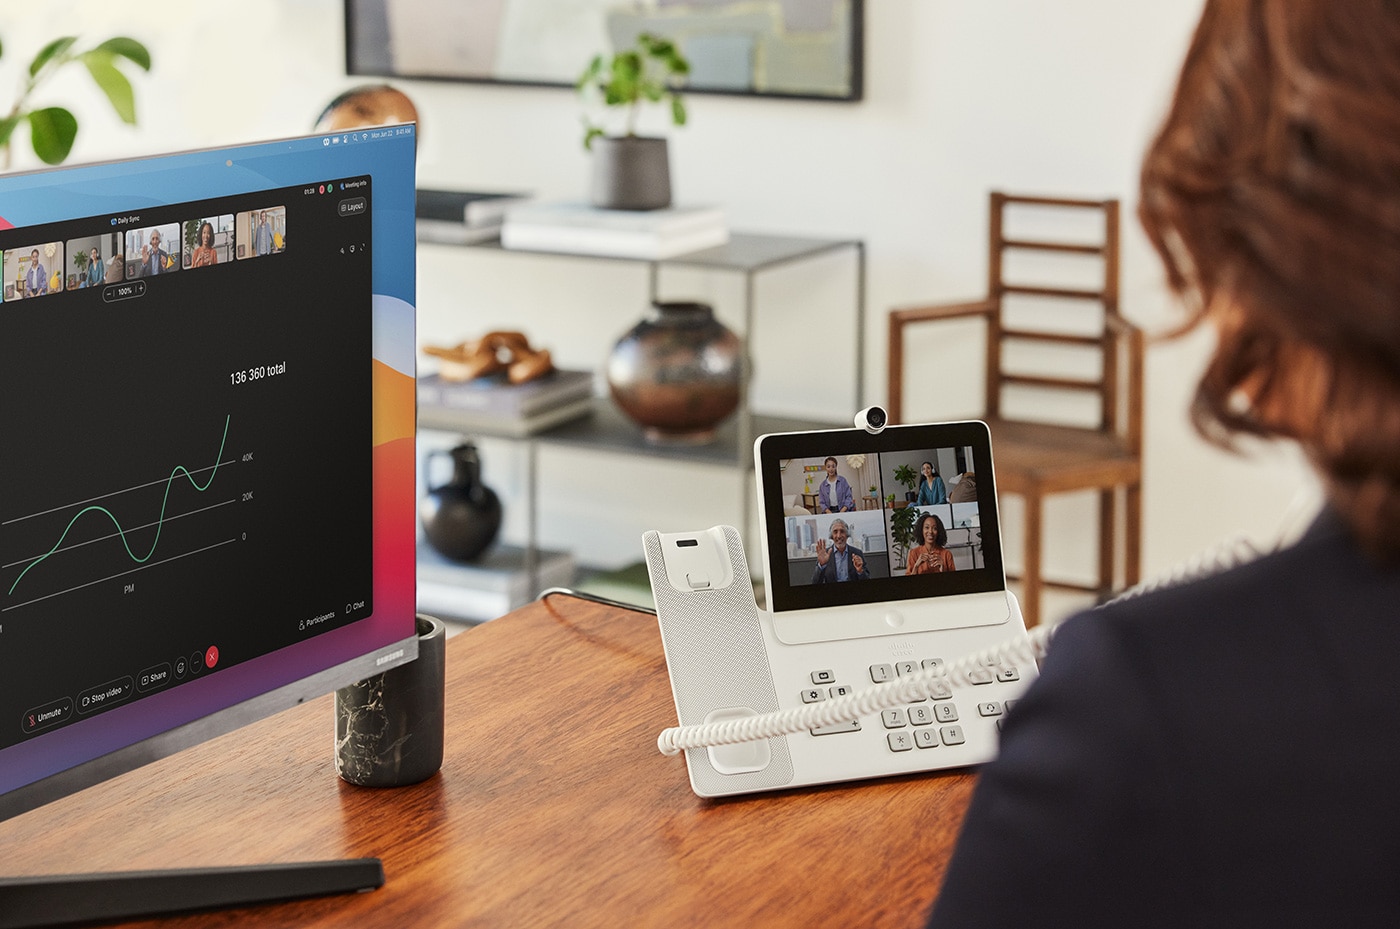 Cisco desk phone 8865 is used for video conference, while computer monitor displays UCaaS platform.